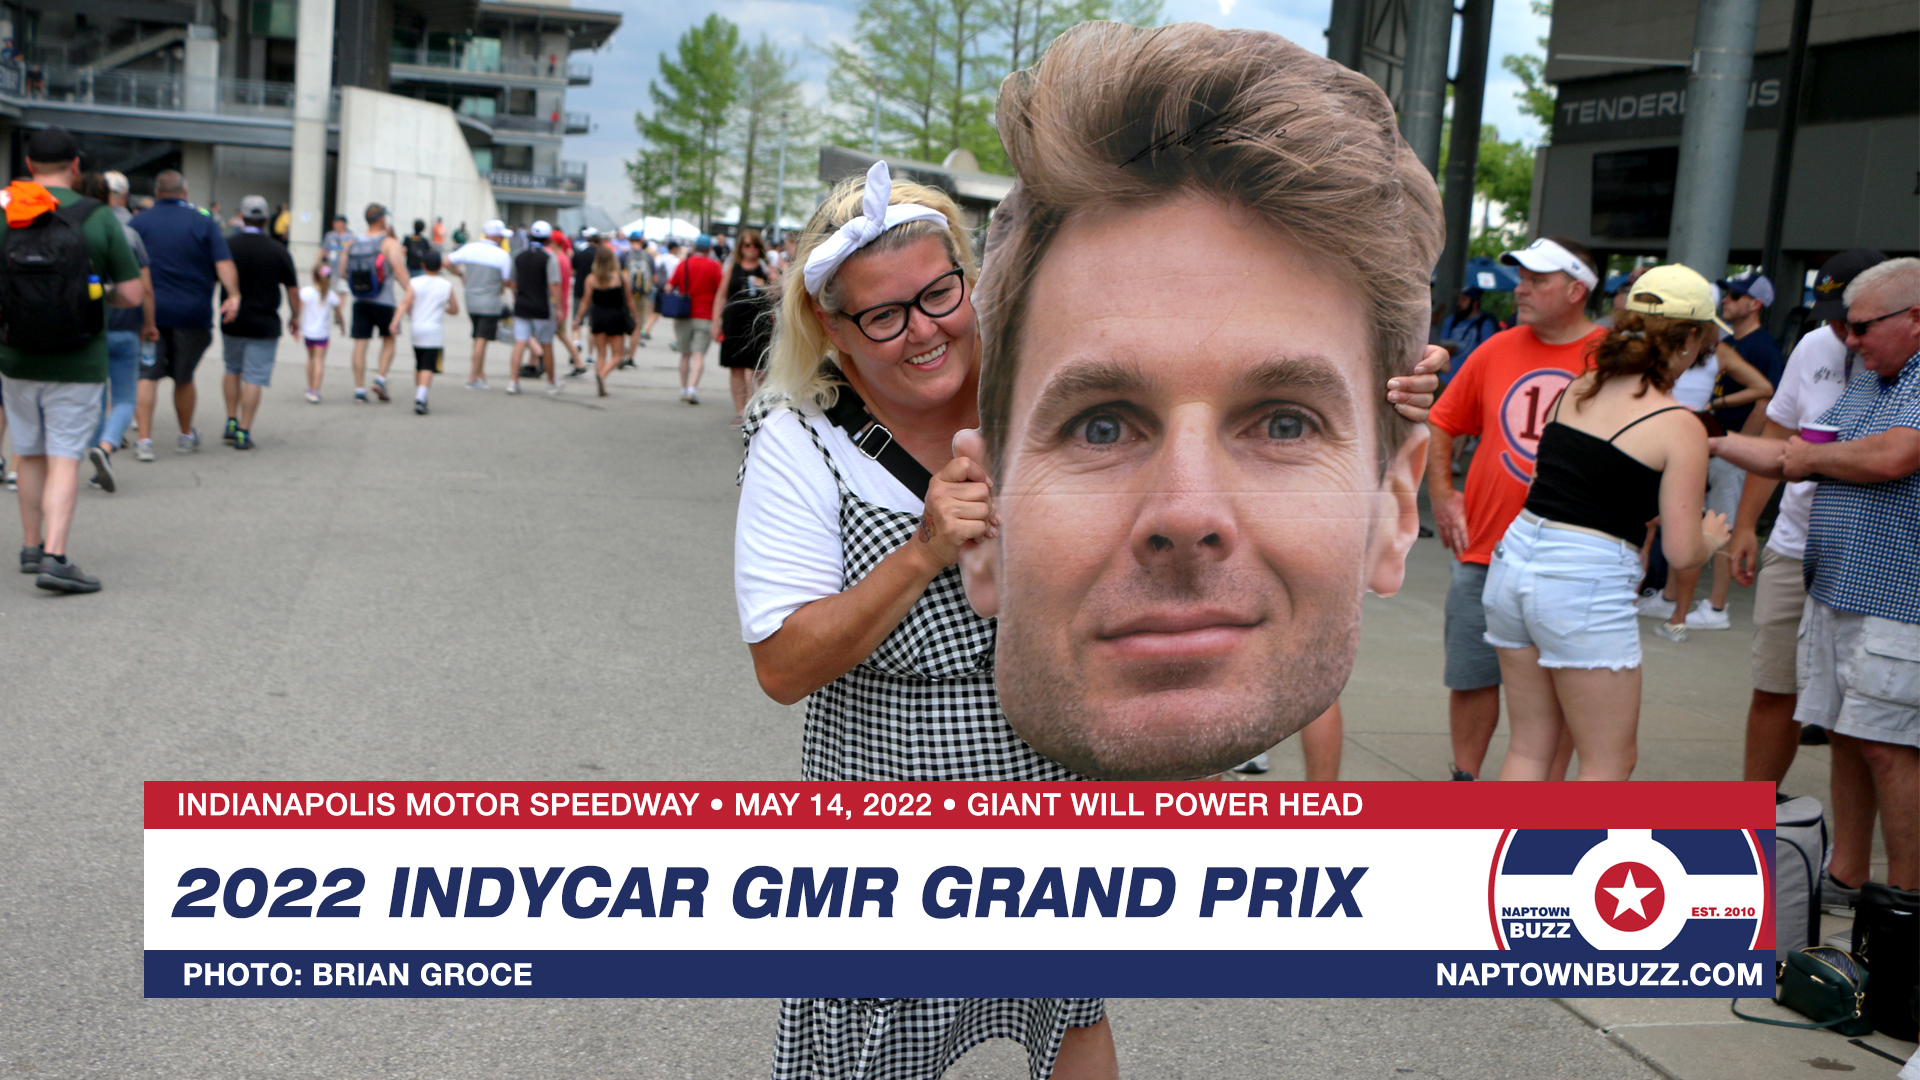 Will Power Giant Head on Indy Car Grand Prix Race Day, May 14, 2022